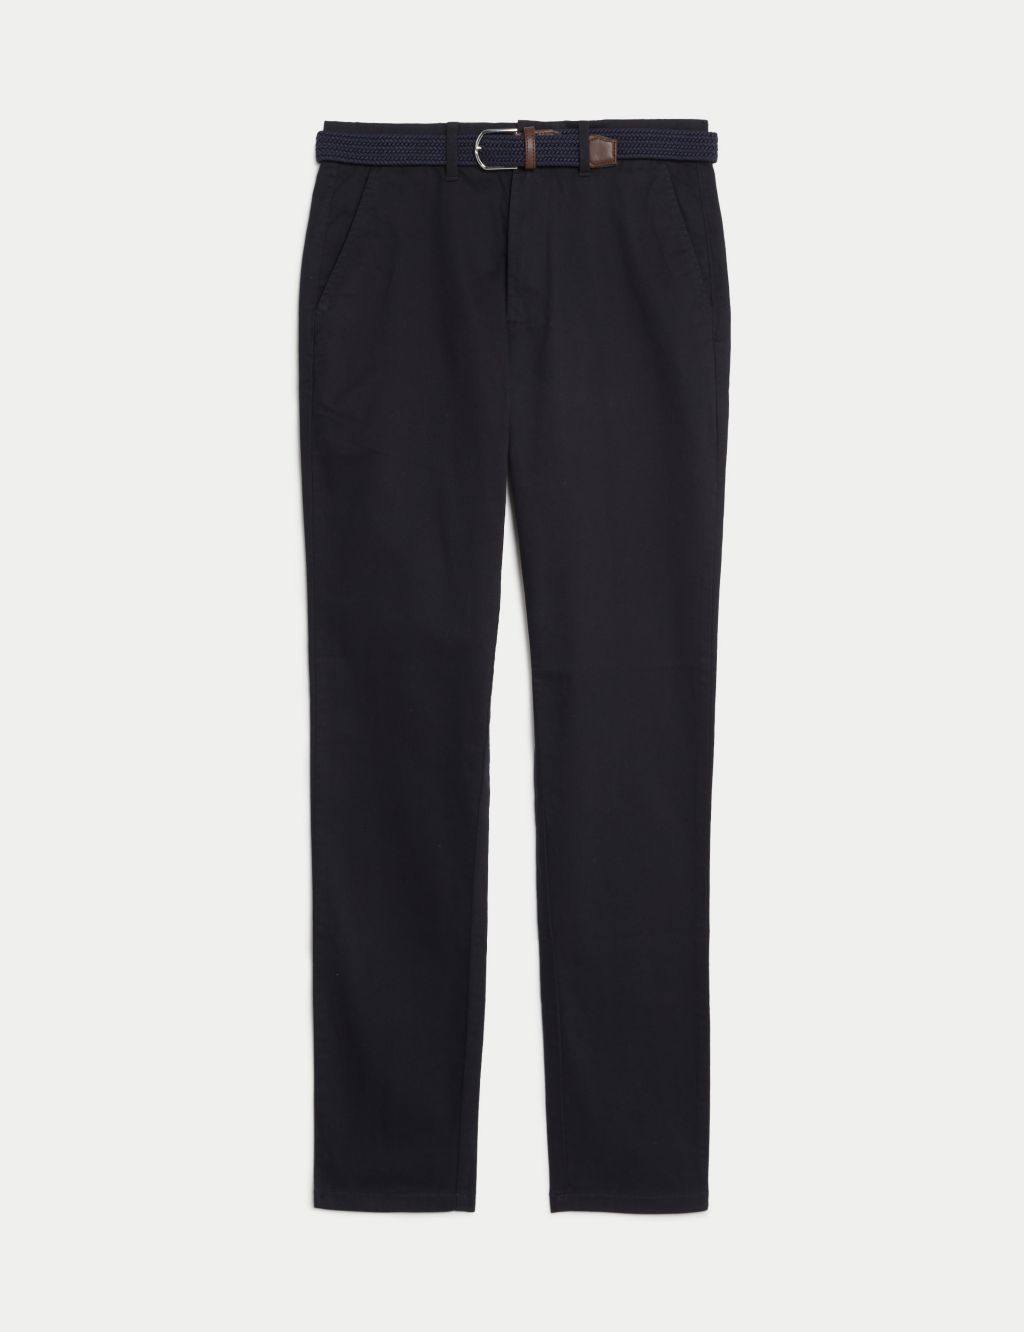 Slim Fit Belted Stretch Chinos image 1